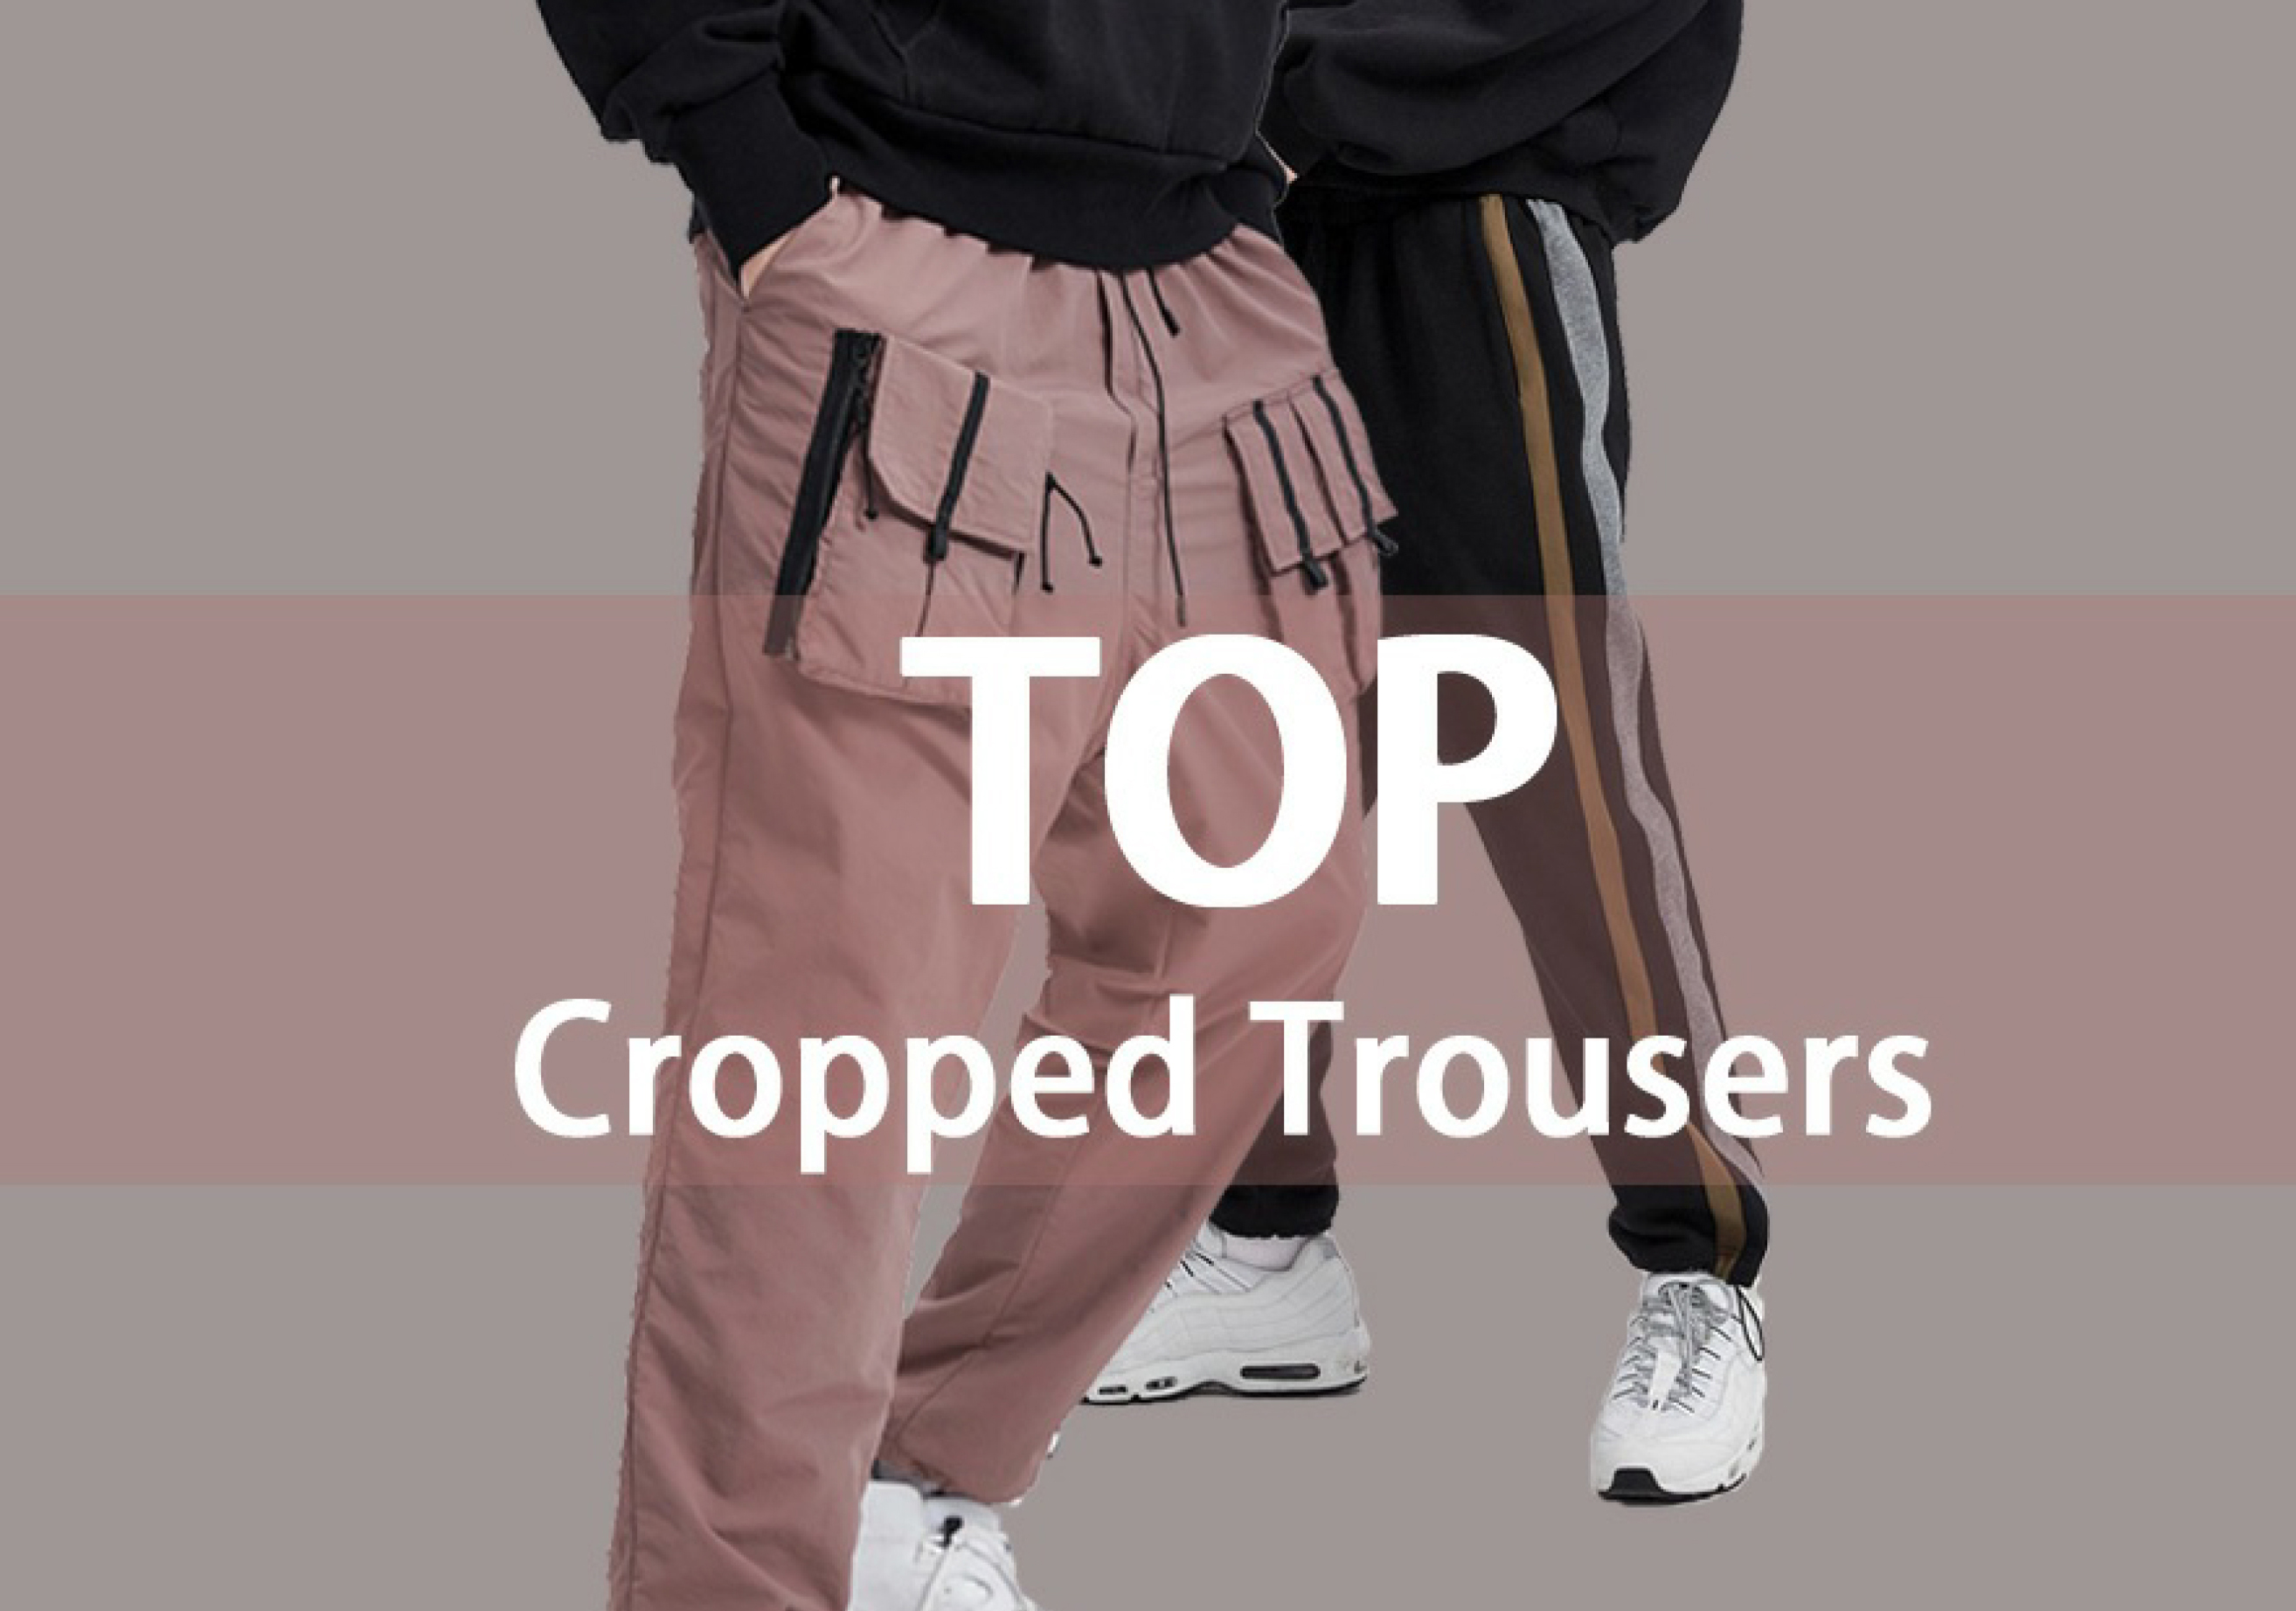 Cropped Trousers -- 18/19 A/W Men's Hot Items